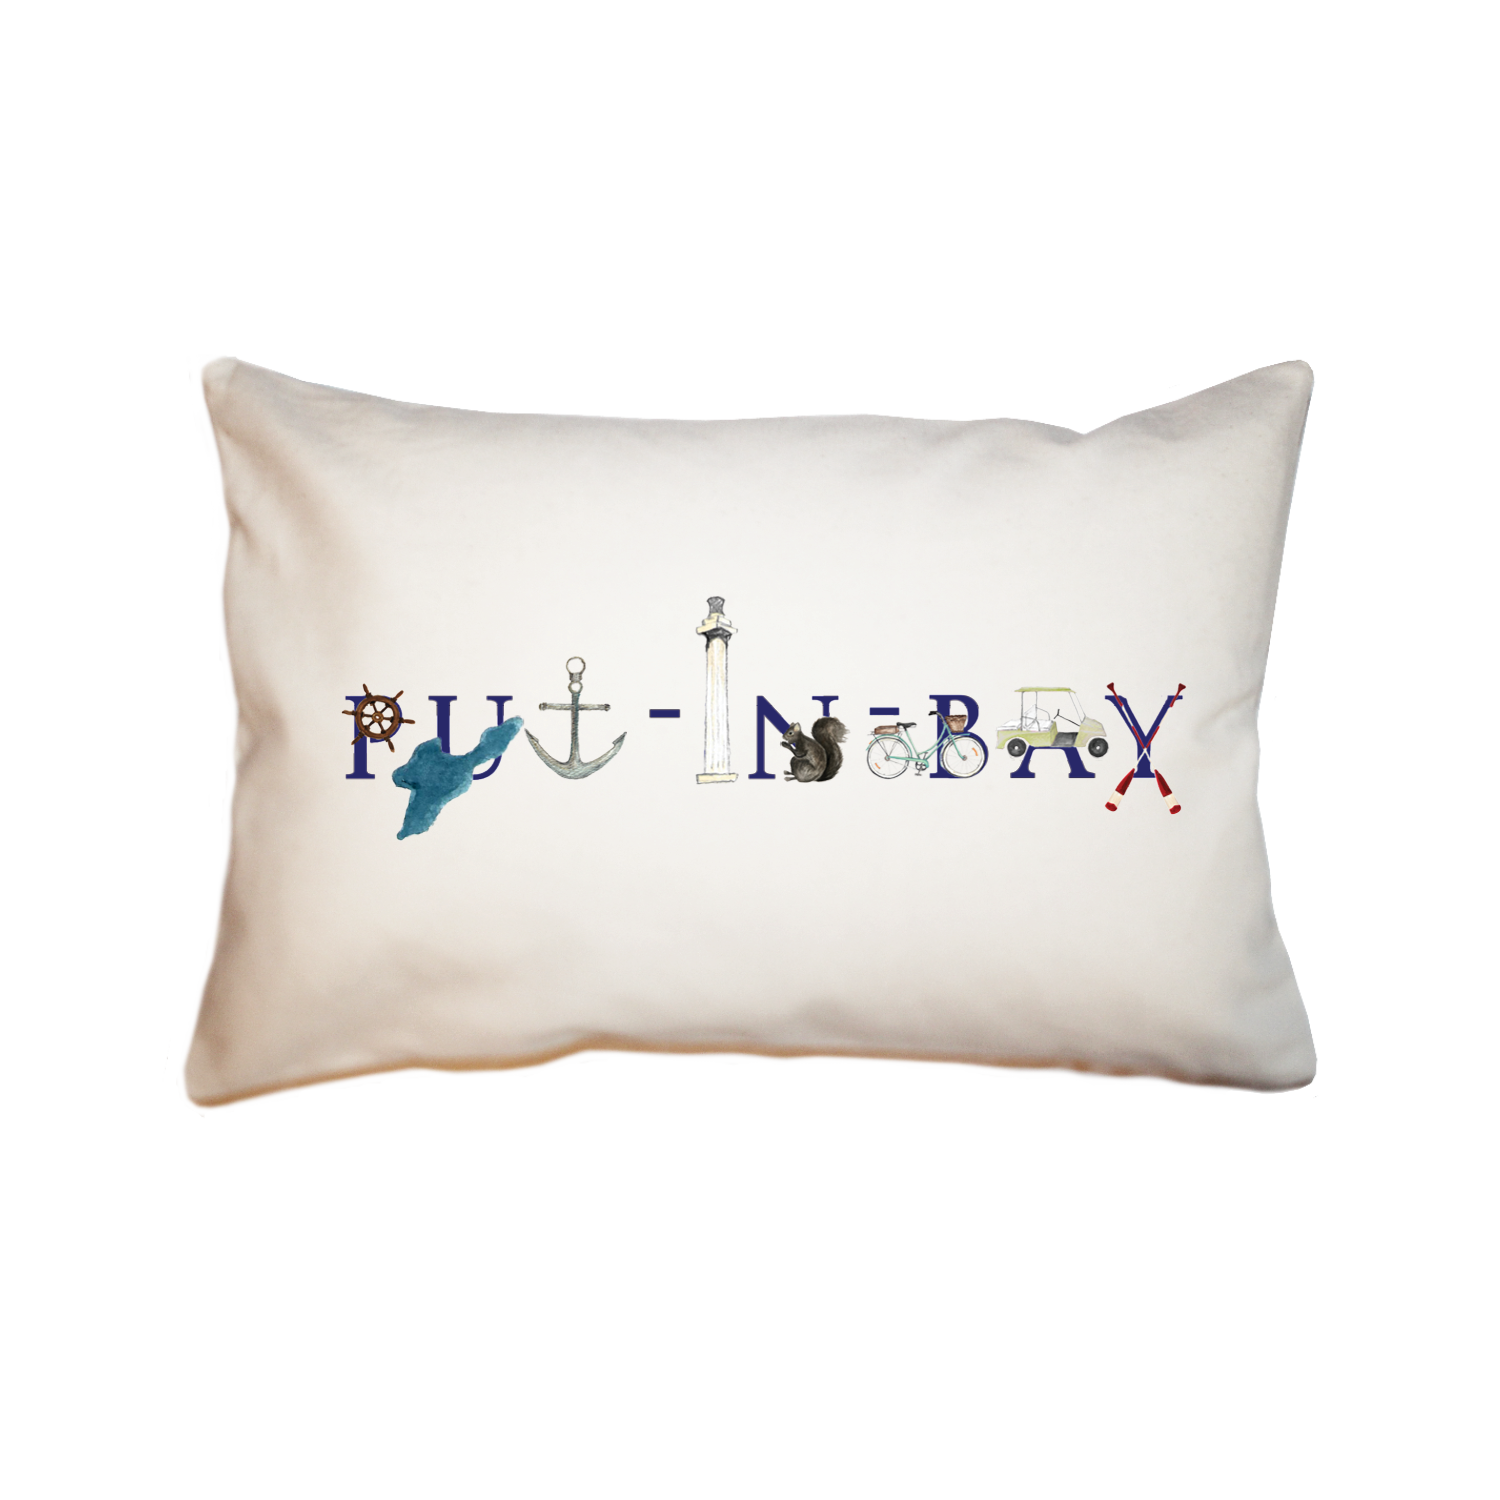 put-in-bay large rectangle pillow